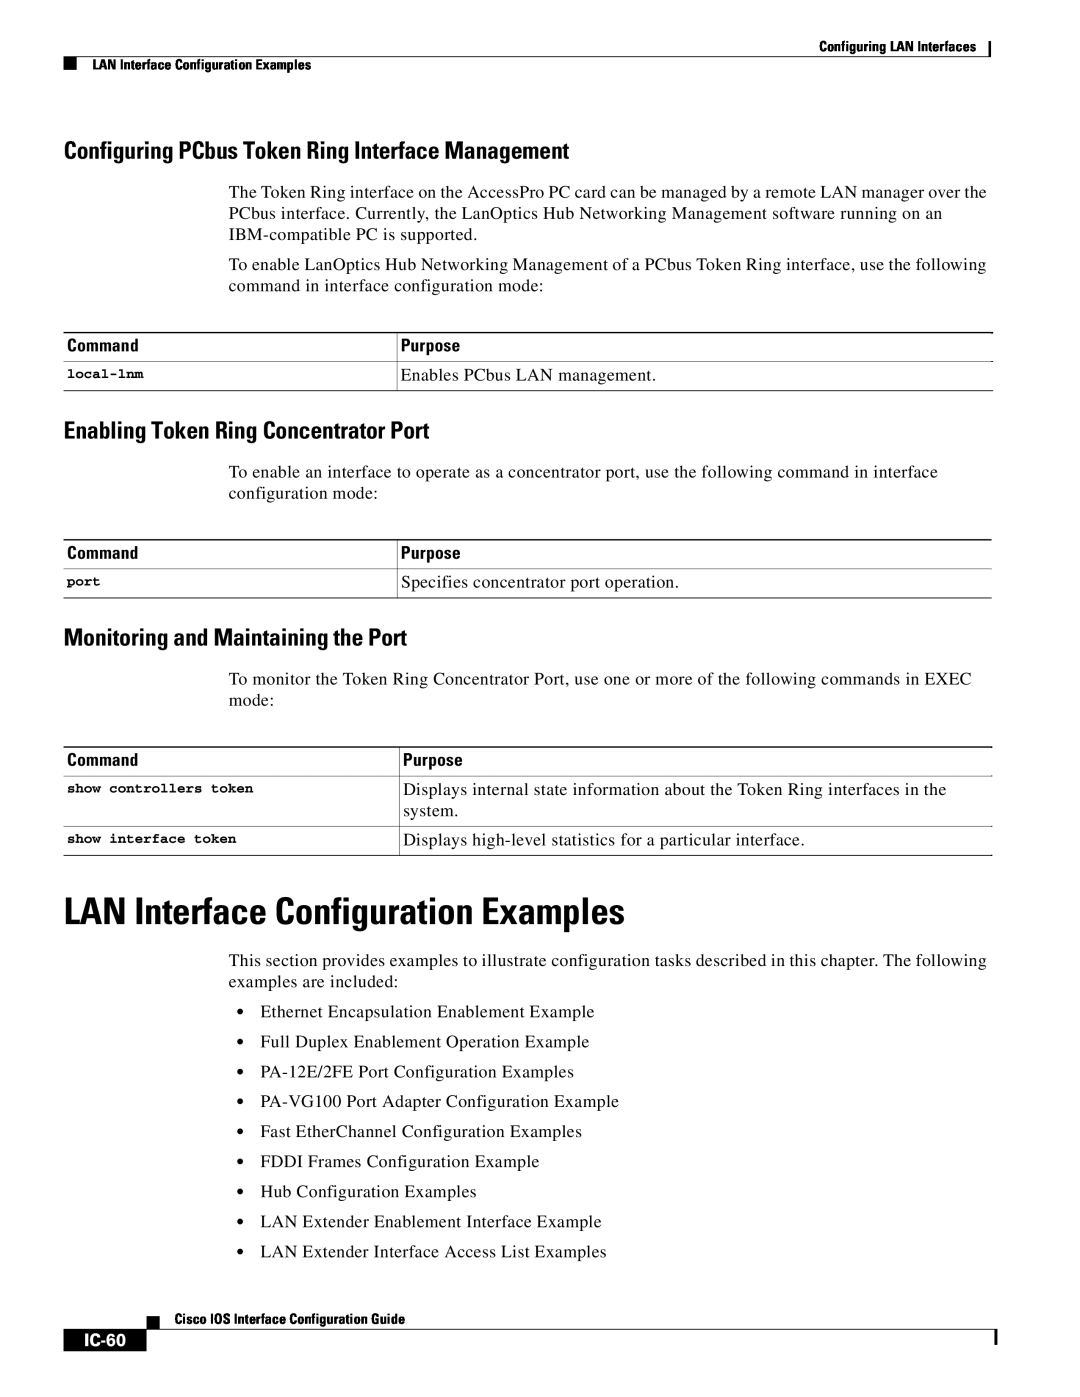 Cisco Systems IC-23 manual LAN Interface Configuration Examples, Configuring PCbus Token Ring Interface Management, IC-60 